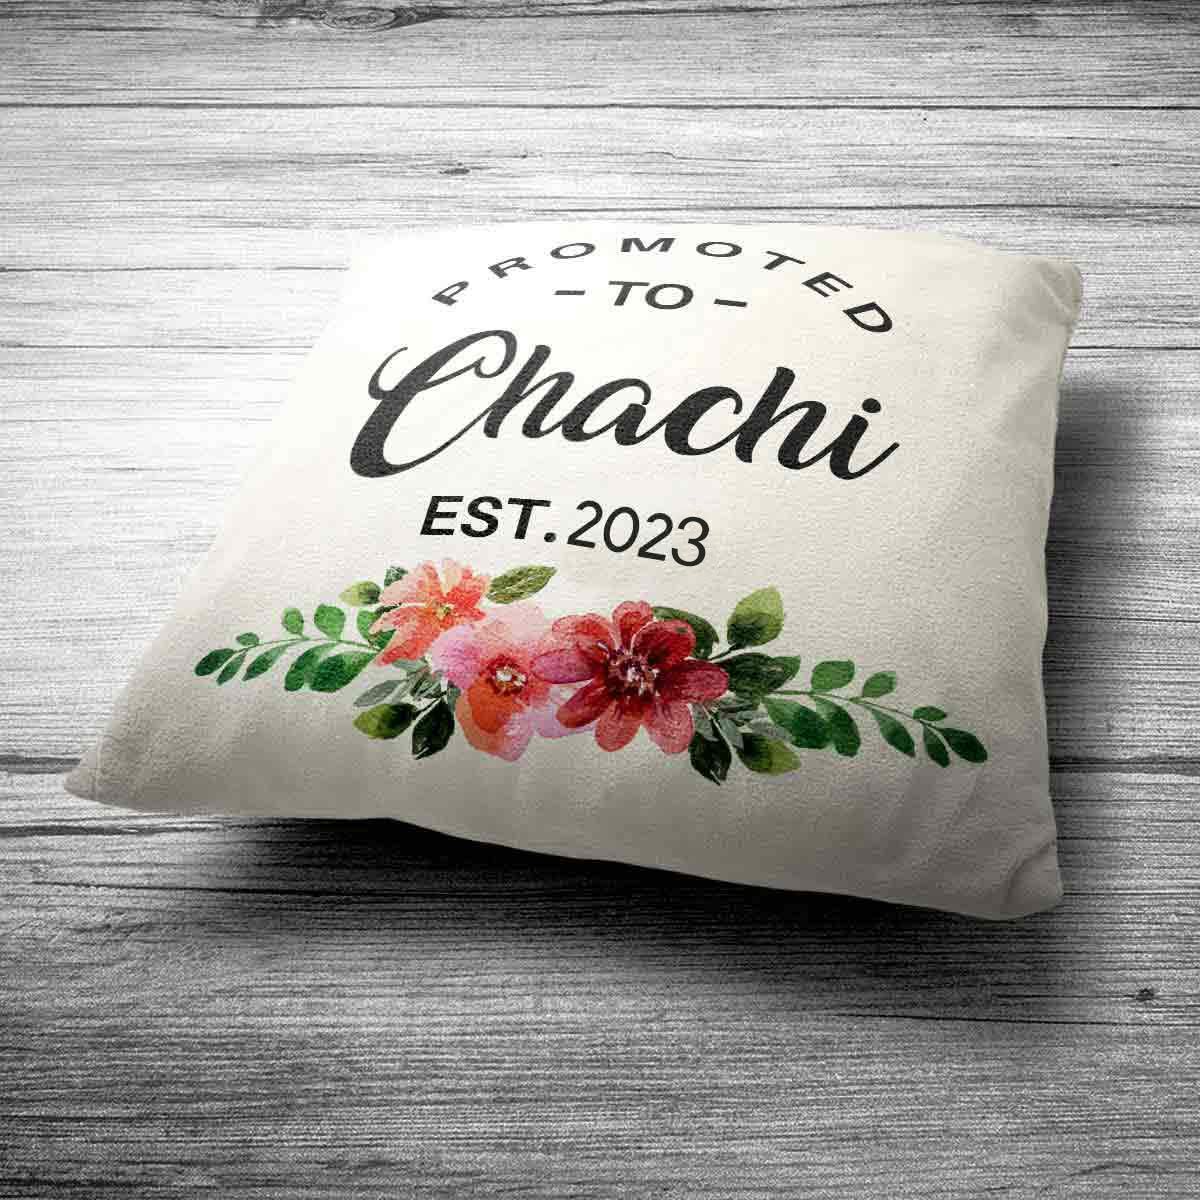 Personalised Promoted to Chachi Cushion